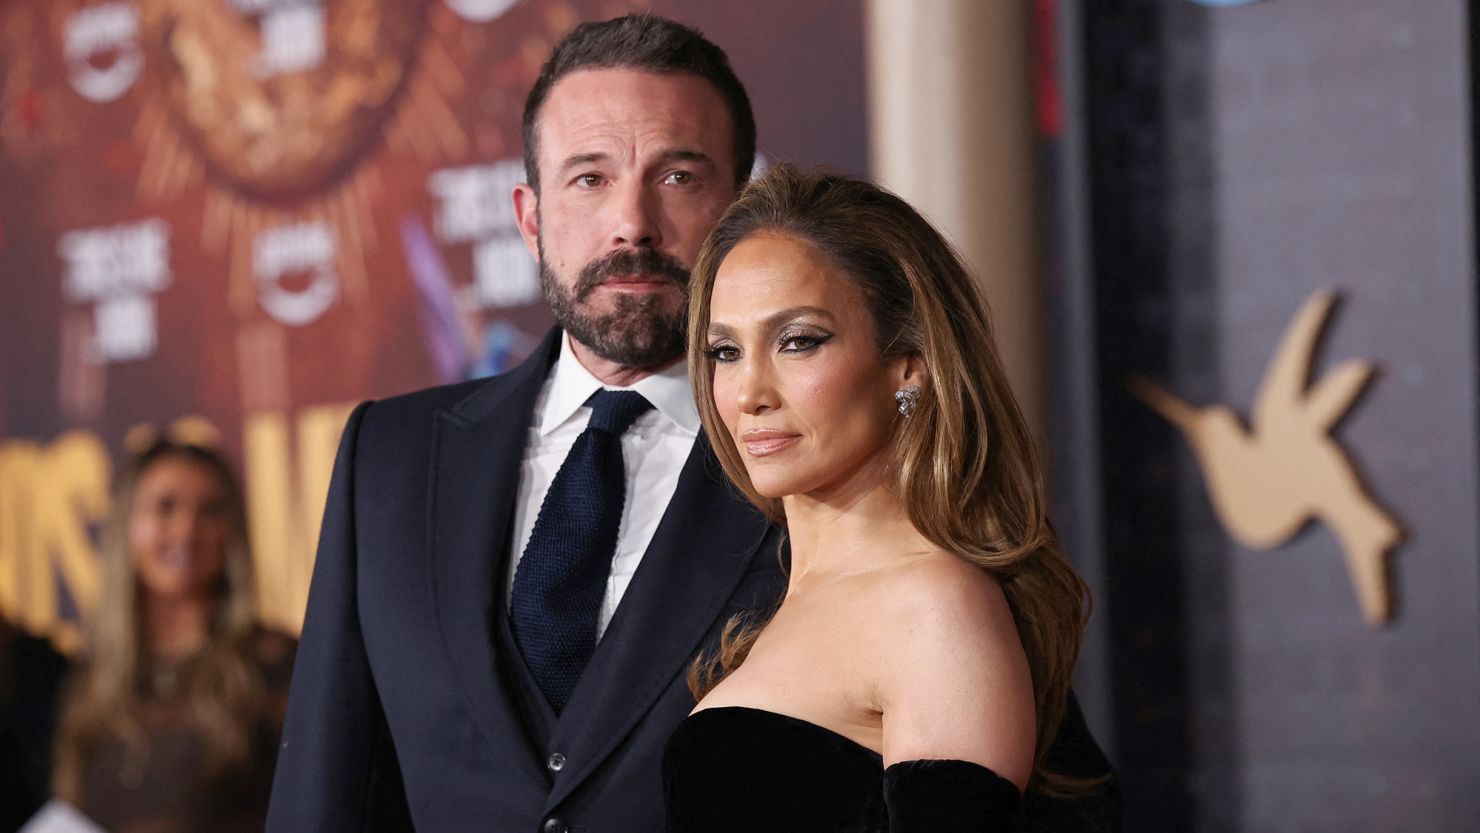 Ben Affleck and Jennifer Lopez at the premiere for "This Is Me... Now: A Love Story" on Feb. 13.